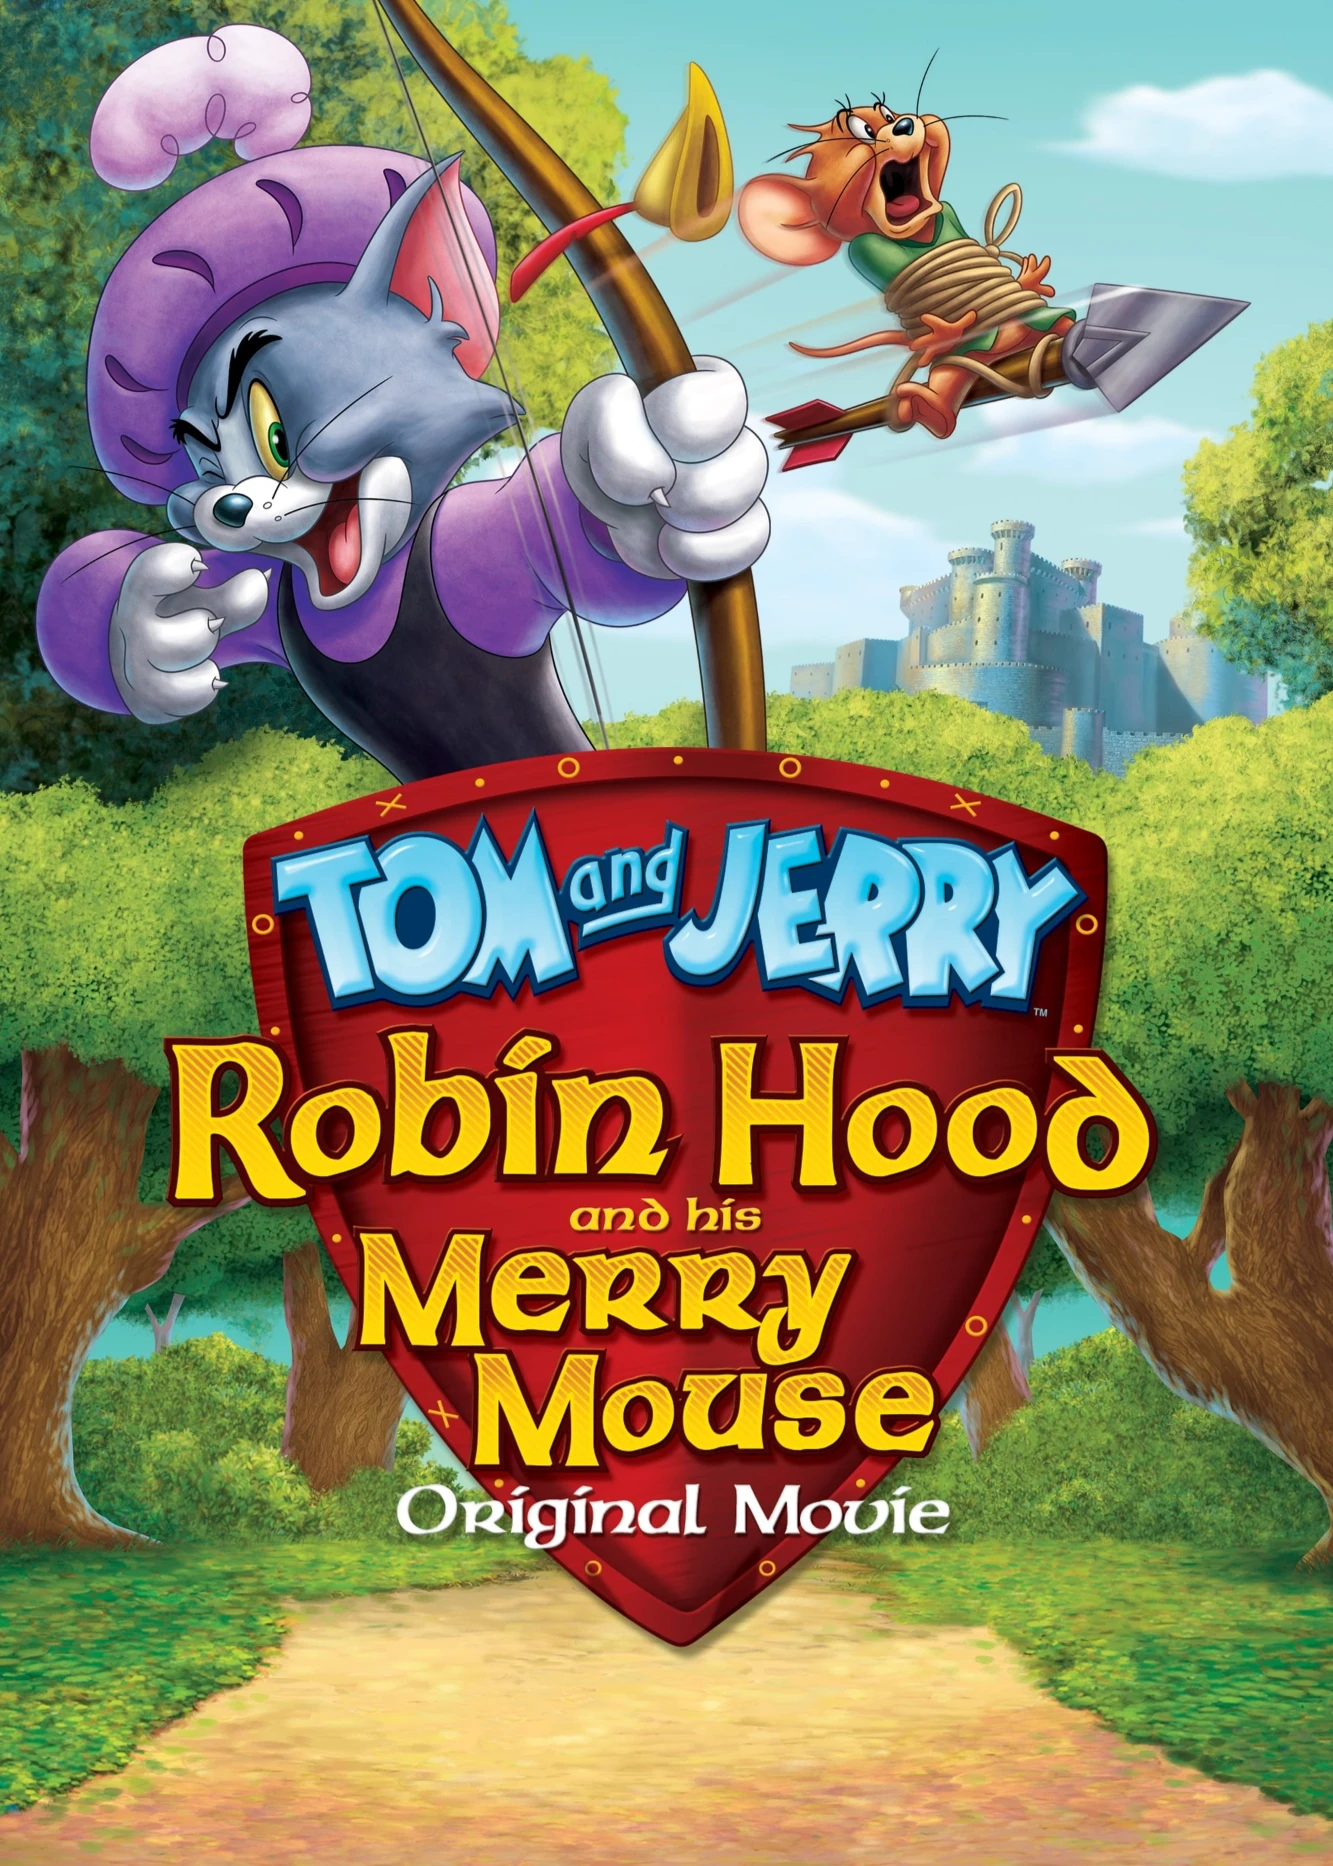 Tom and Jerry: Robin Hood and His Merry Mouse | Tom and Jerry: Robin Hood and His Merry Mouse (2012)